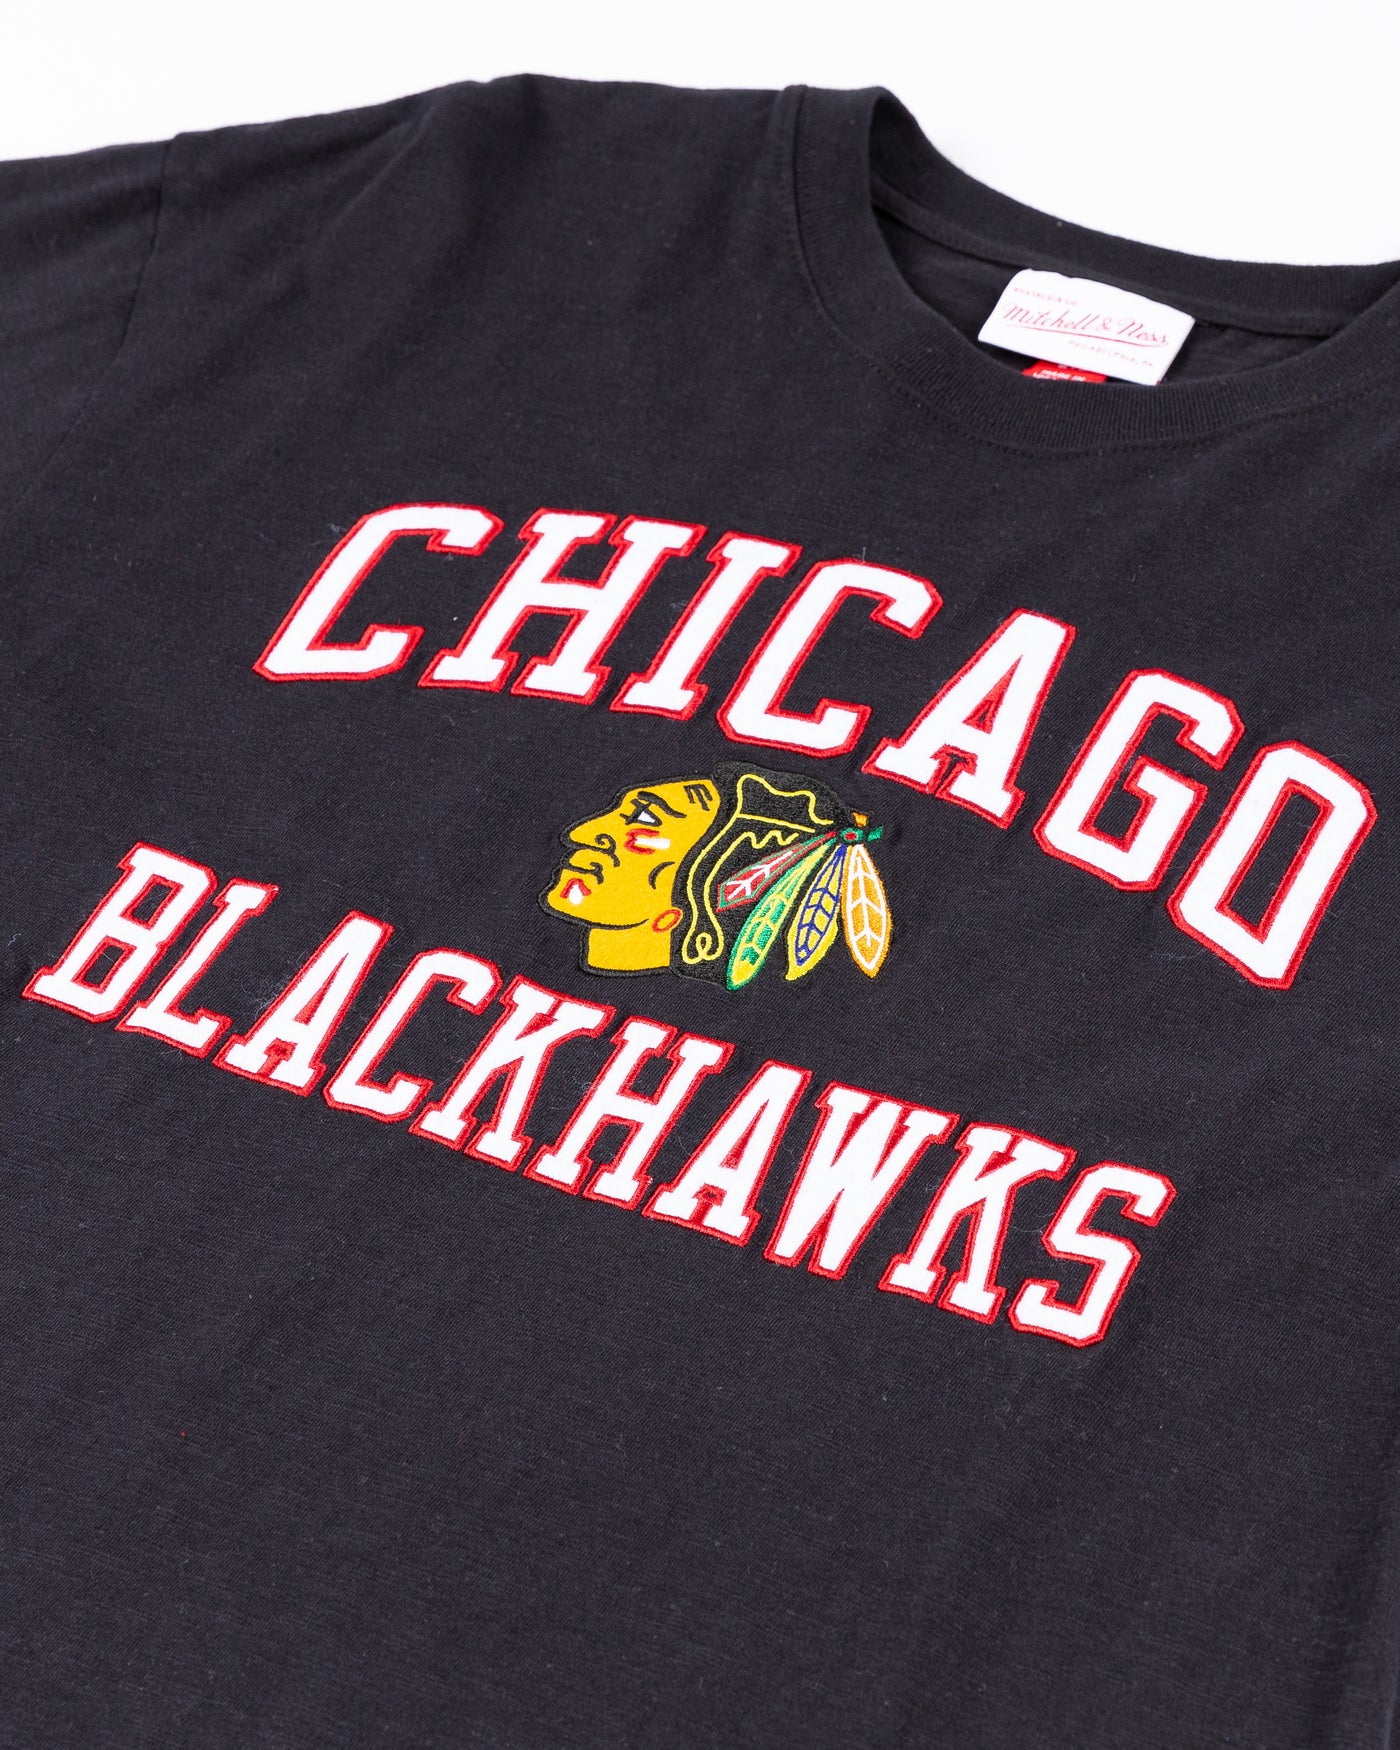 black Mitchell & Ness shirt with embroidered Chicago Blackhawks wordmark and primary logo on front - detail lay flat